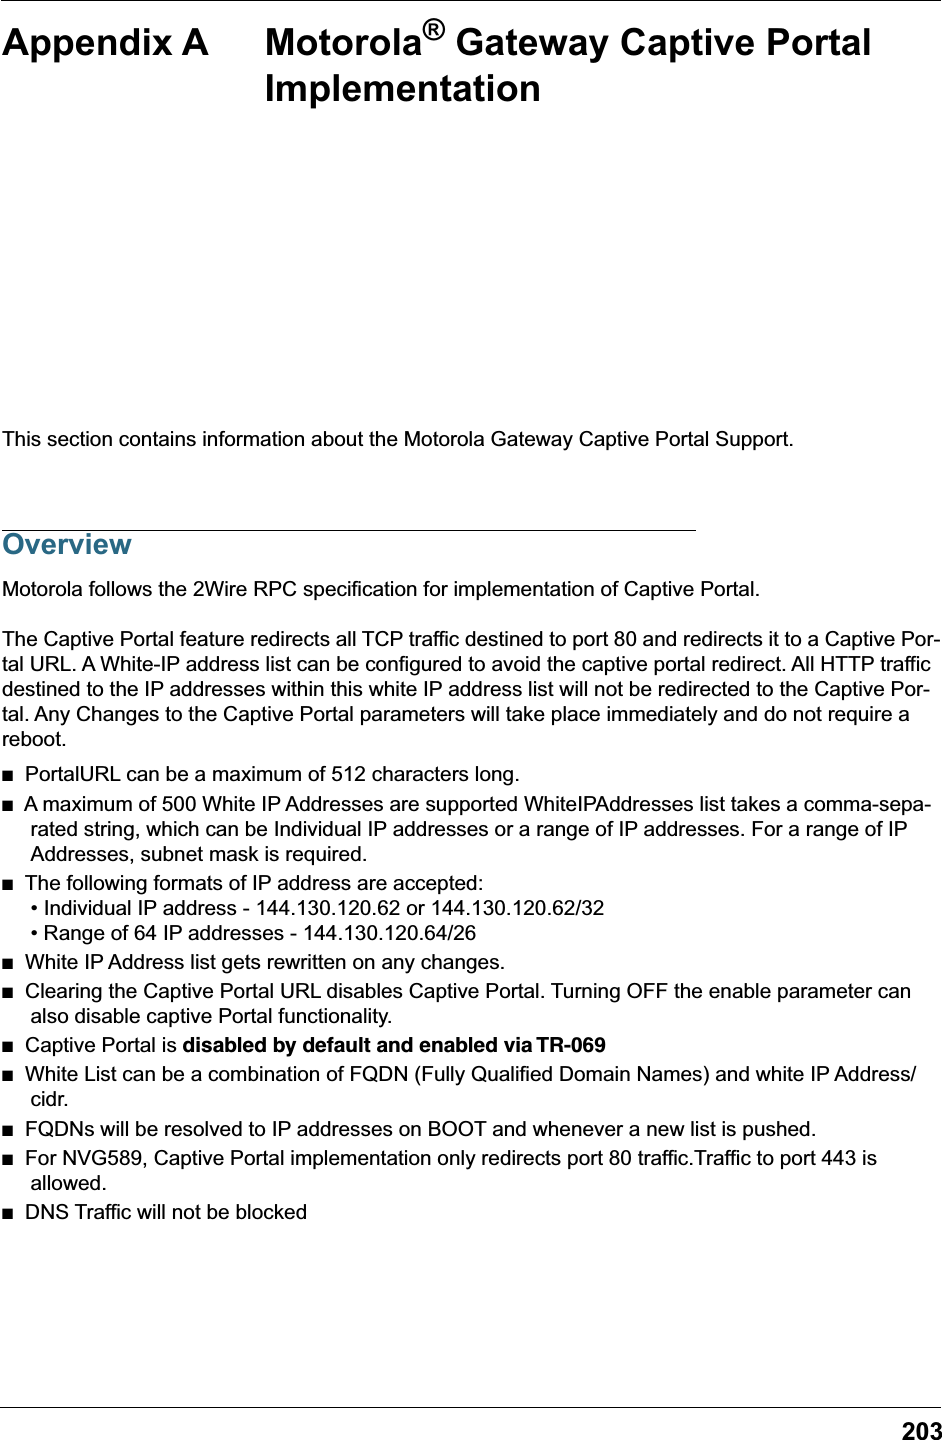 203Appendix A Motorola® Gateway Captive Portal ImplementationThis section contains information about the Motorola Gateway Captive Portal Support.OverviewMotorola follows the 2Wire RPC specification for implementation of Captive Portal.The Captive Portal feature redirects all TCP traffic destined to port 80 and redirects it to a Captive Por-tal URL. A White-IP address list can be configured to avoid the captive portal redirect. All HTTP traffic destined to the IP addresses within this white IP address list will not be redirected to the Captive Por-tal. Any Changes to the Captive Portal parameters will take place immediately and do not require a reboot.■   PortalURL can be a maximum of 512 characters long. ■   A maximum of 500 White IP Addresses are supported WhiteIPAddresses list takes a comma-sepa-rated string, which can be Individual IP addresses or a range of IP addresses. For a range of IP Addresses, subnet mask is required. ■   The following formats of IP address are accepted:• Individual IP address - 144.130.120.62 or 144.130.120.62/32• Range of 64 IP addresses - 144.130.120.64/26 ■   White IP Address list gets rewritten on any changes. ■   Clearing the Captive Portal URL disables Captive Portal. Turning OFF the enable parameter can also disable captive Portal functionality.■   Captive Portal is disabled by default and enabled via TR-069■   White List can be a combination of FQDN (Fully Qualified Domain Names) and white IP Address/cidr.■   FQDNs will be resolved to IP addresses on BOOT and whenever a new list is pushed.■   For NVG589, Captive Portal implementation only redirects port 80 traffic.Traffic to port 443 is allowed.■   DNS Traffic will not be blocked